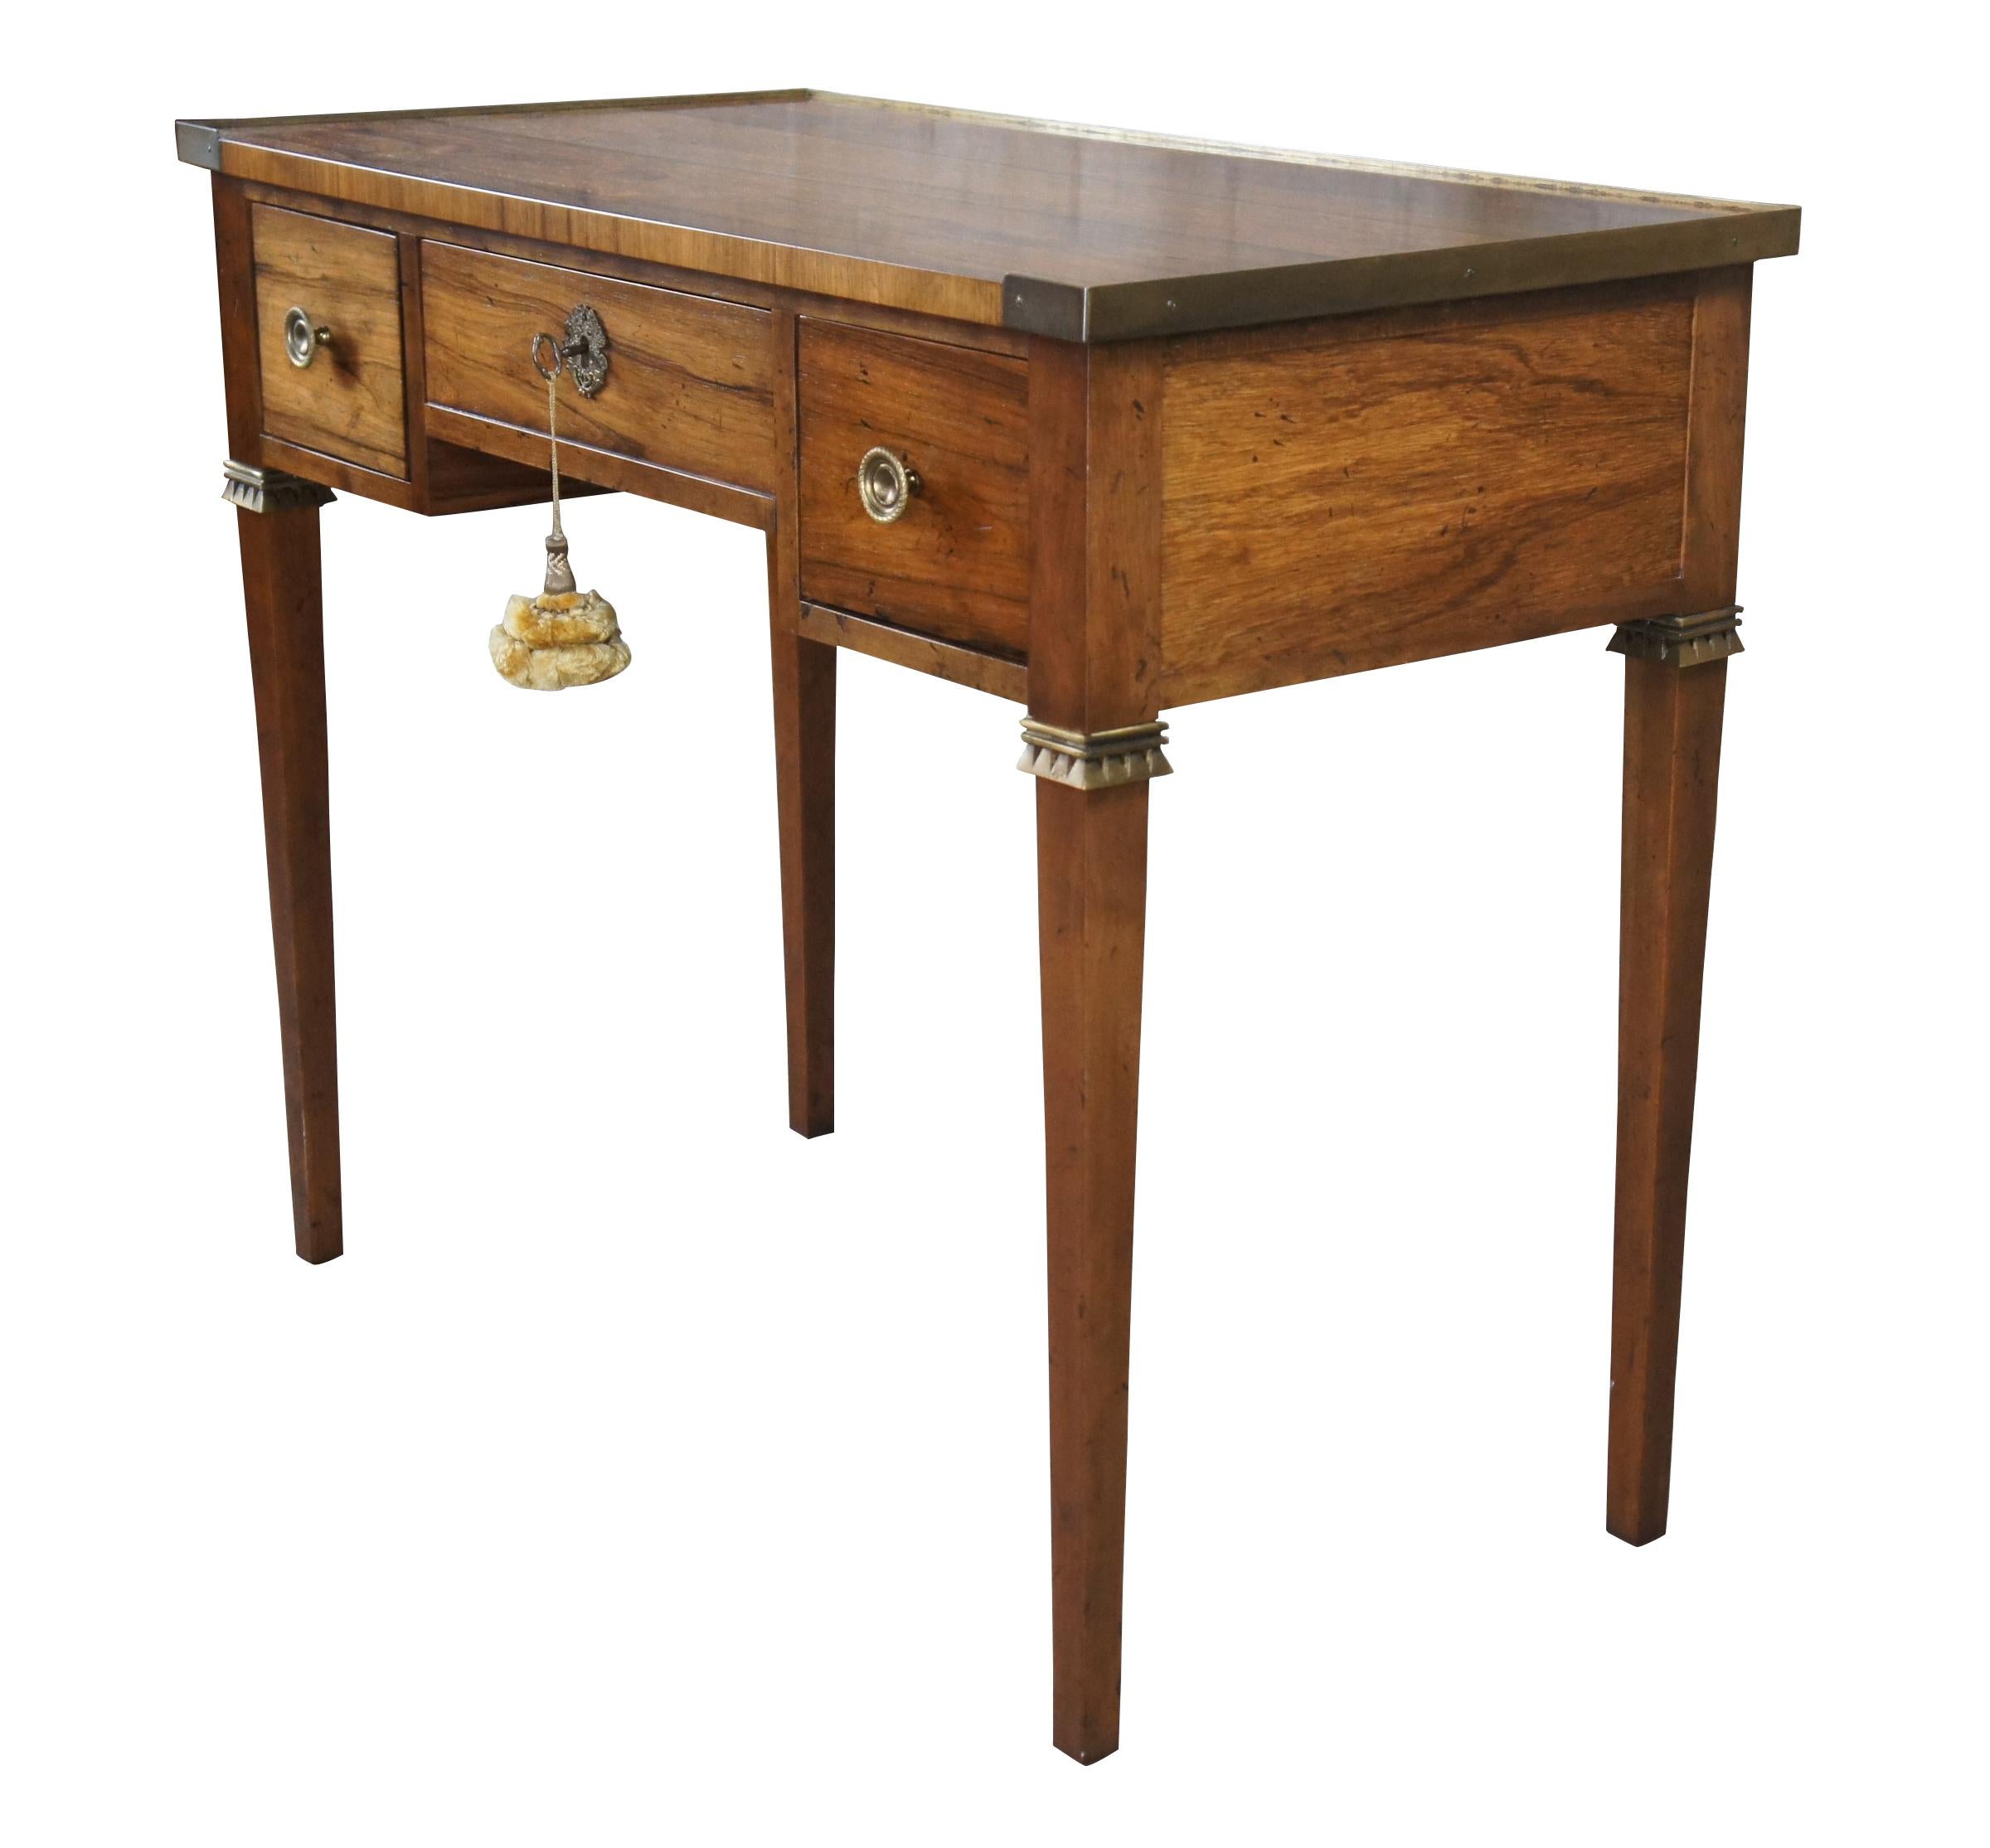 A stunning 1960s French Louis XVI or neoclassical style ladies desk / receiving table by Michael Taylor for Baker Furniture Inc. Features a rectangular top with brass banding over a frieze fitted with three dovetailed drawers, decorated with ornate